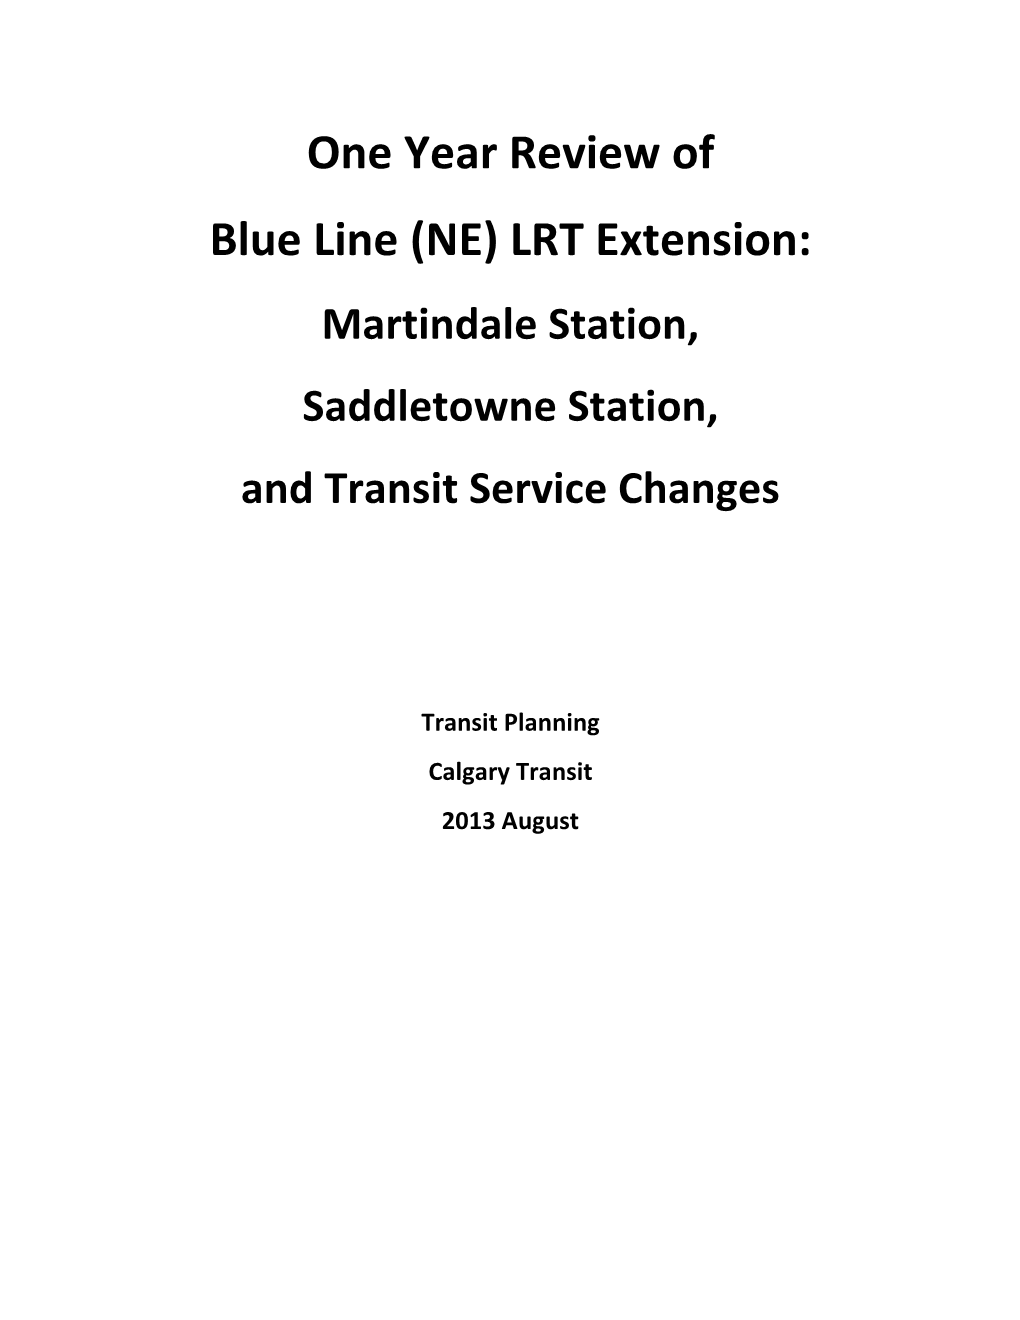 One Year Review of Blue Line (NE) LRT Extension: Martindale Station, Saddletowne Station, and Transit Service Changes